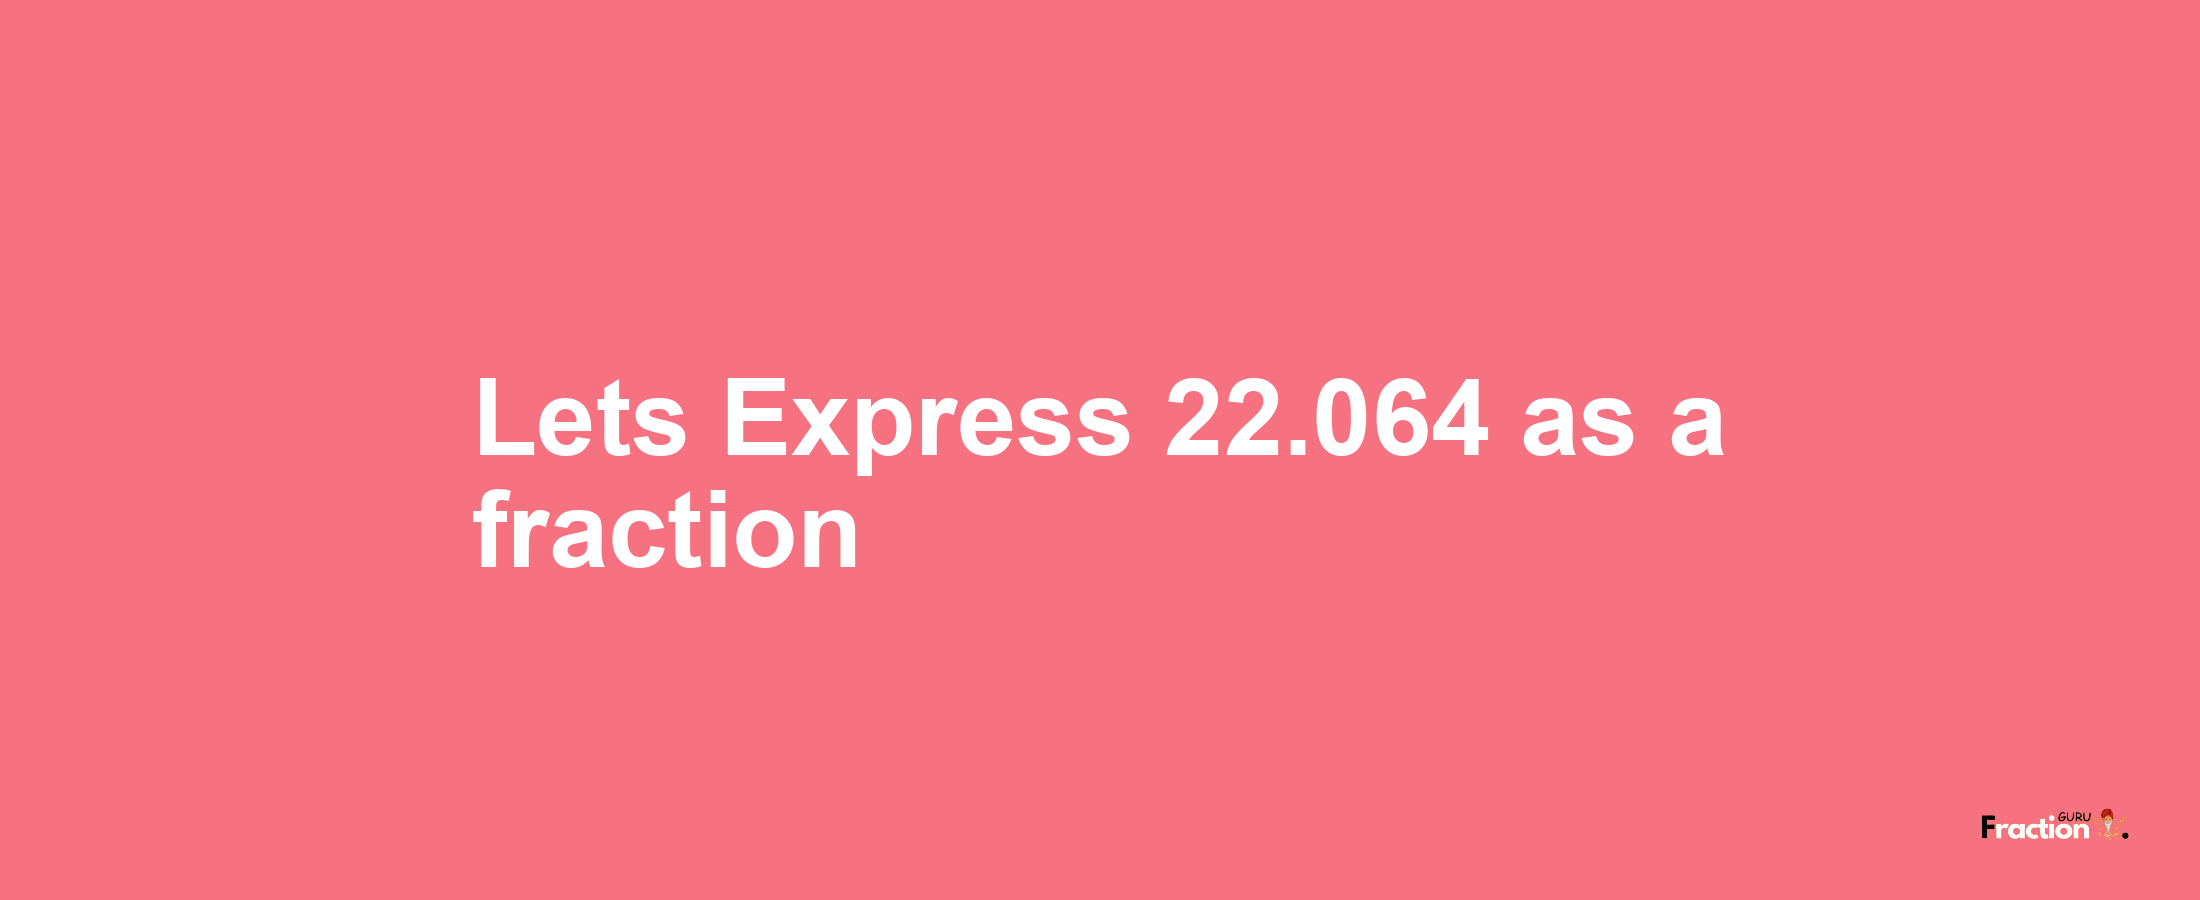 Lets Express 22.064 as afraction